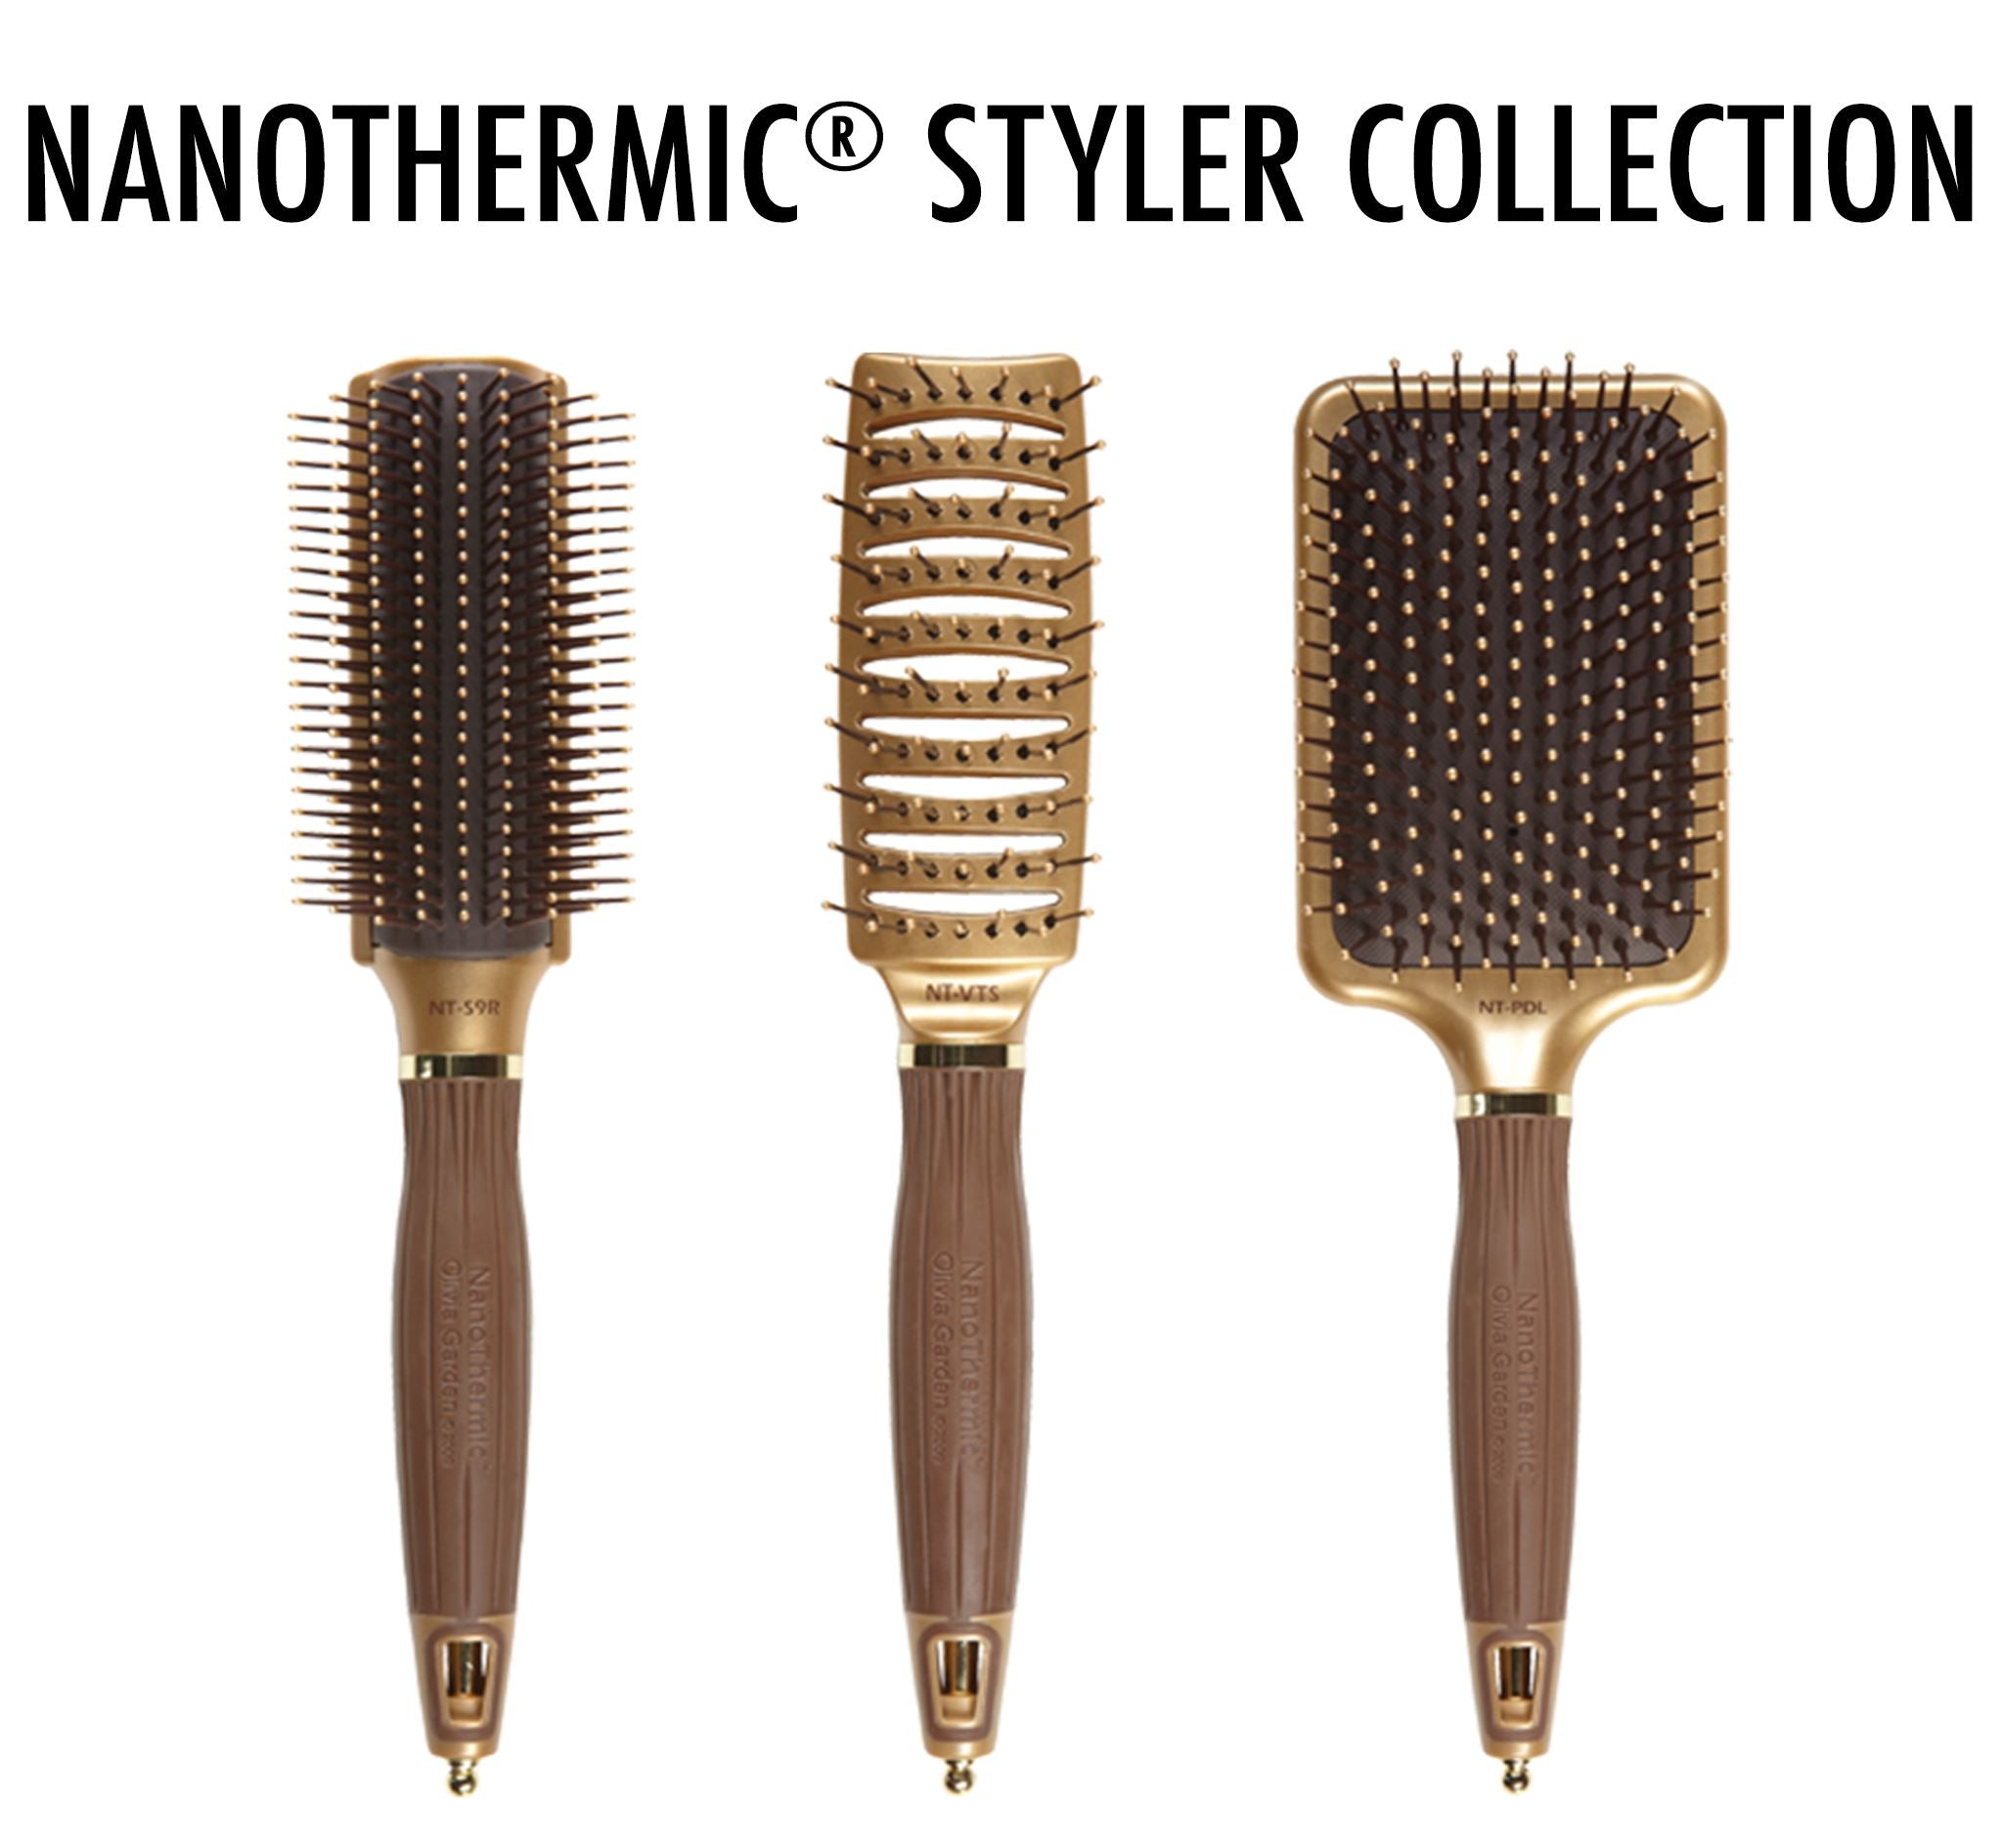 NanoThermic® Styler Collection - SH Salons